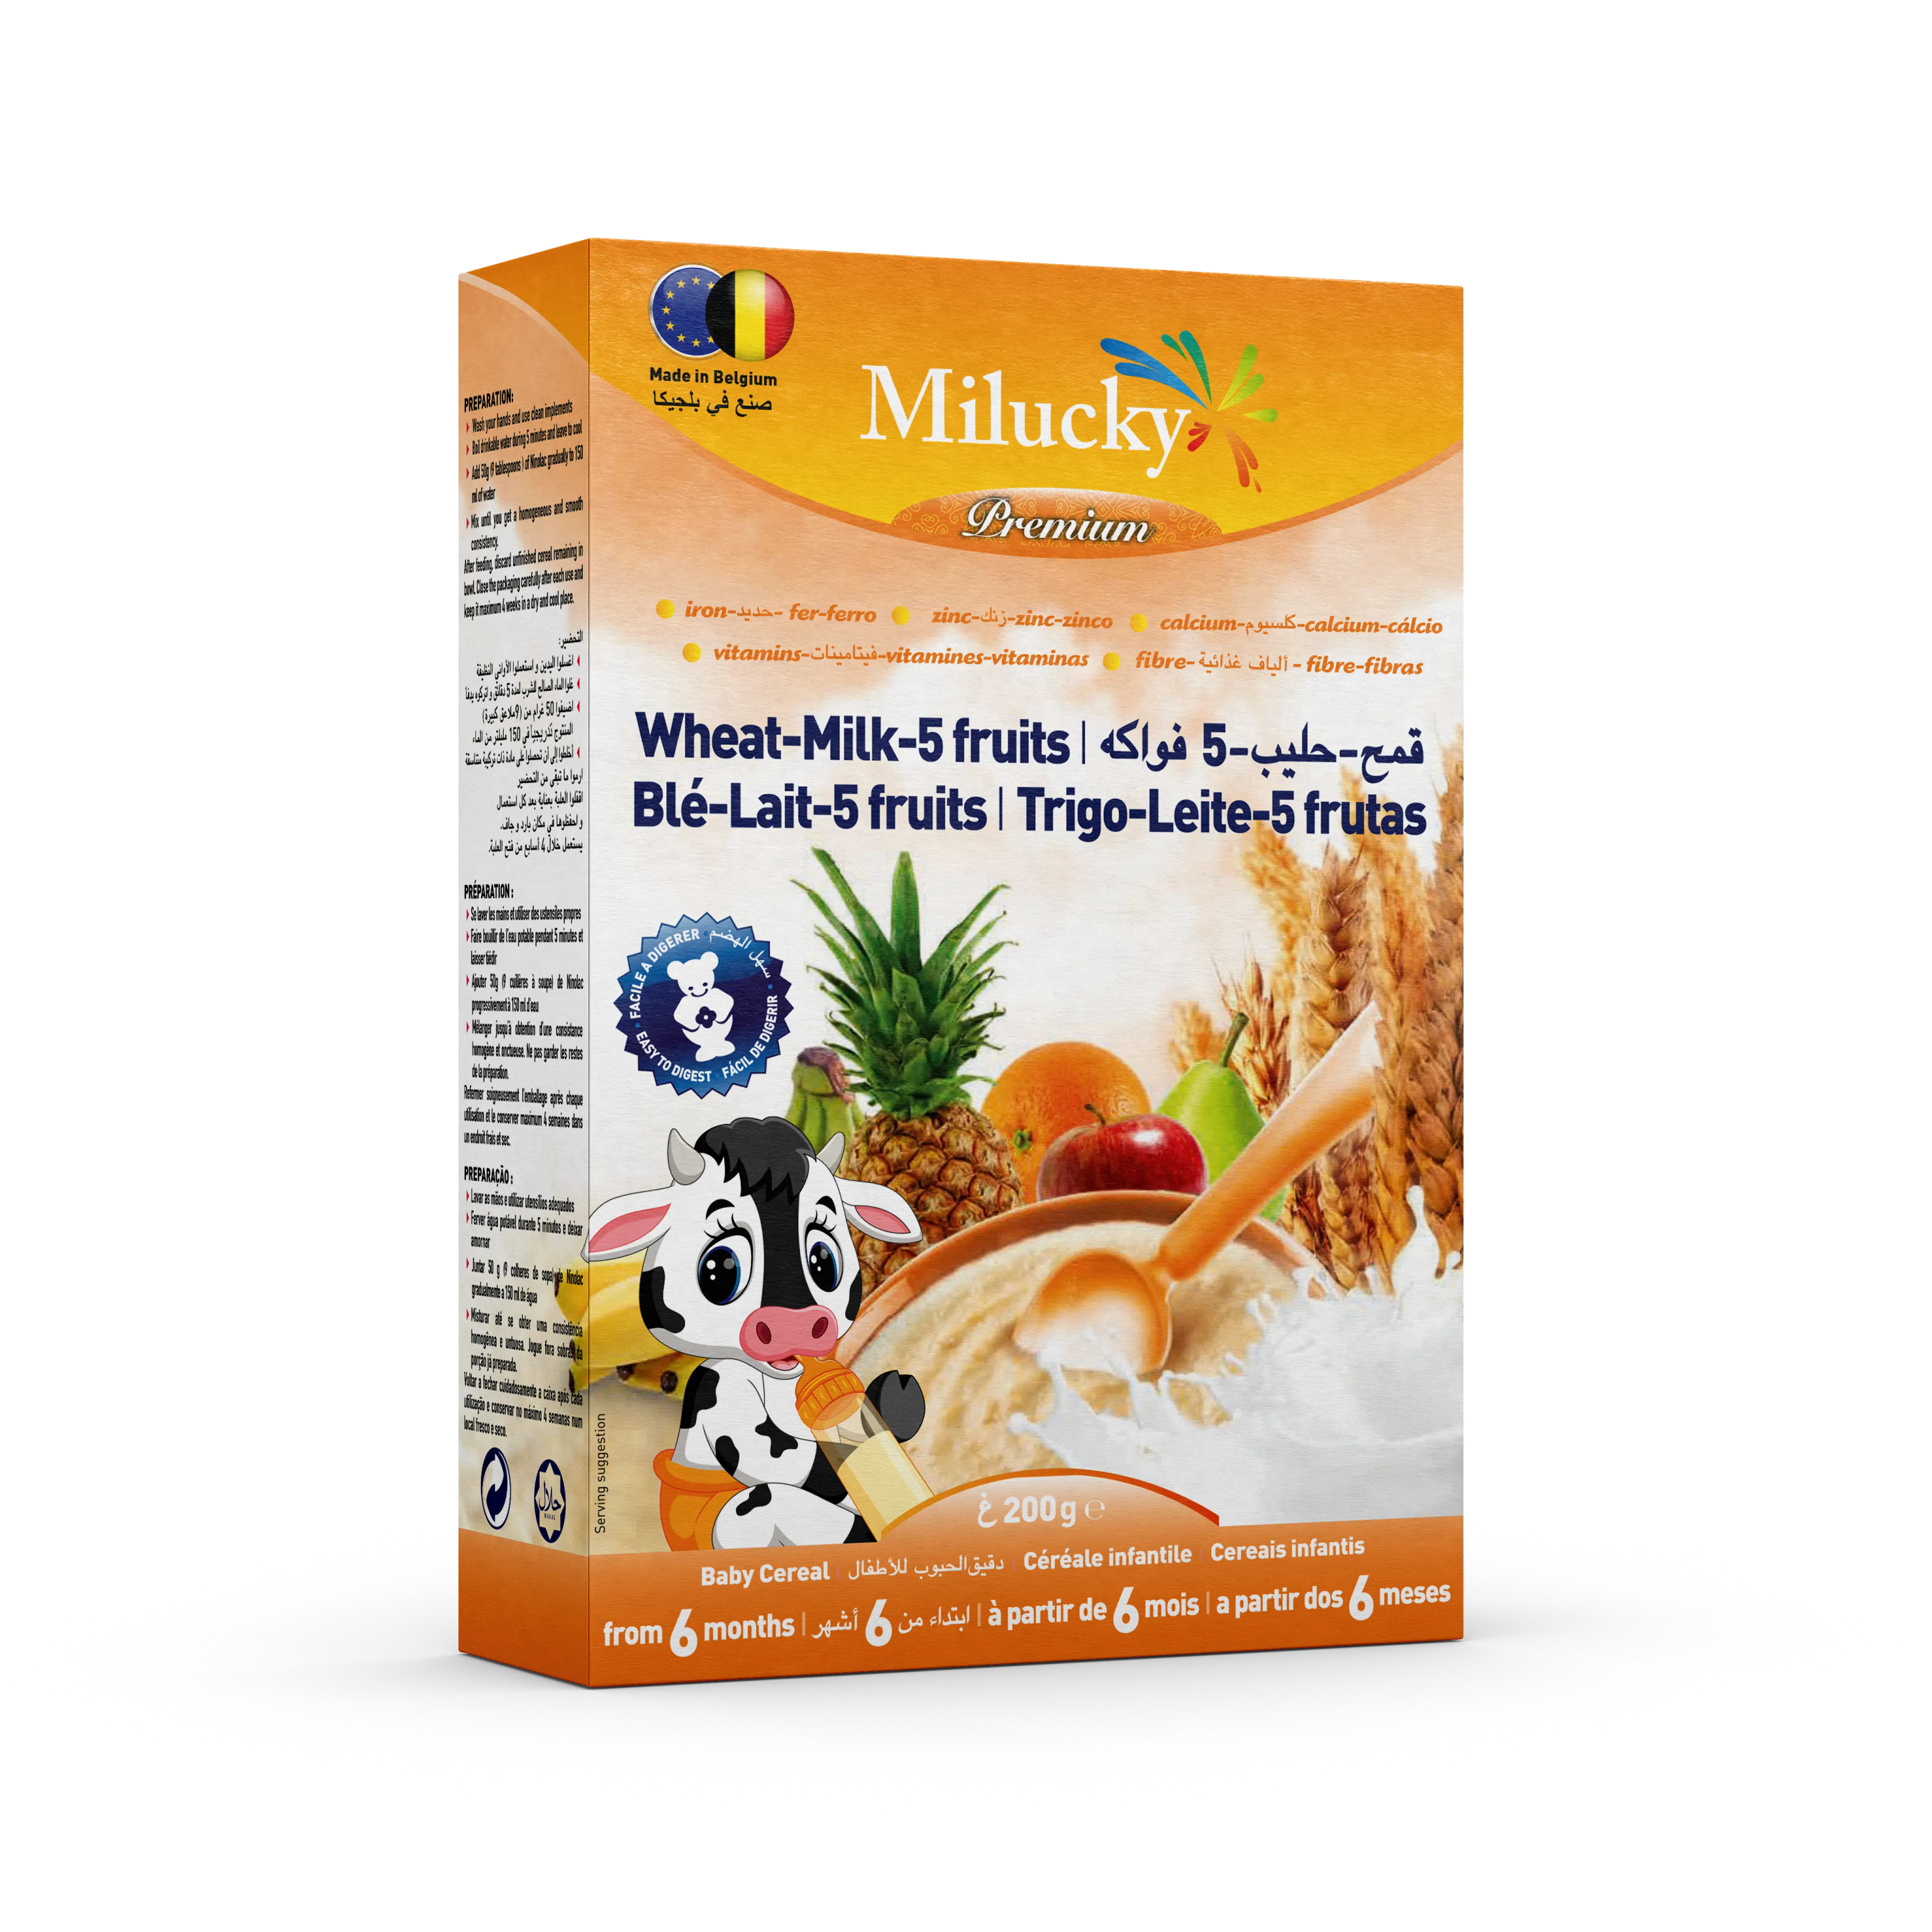 Wheat cereals with 5 fruits